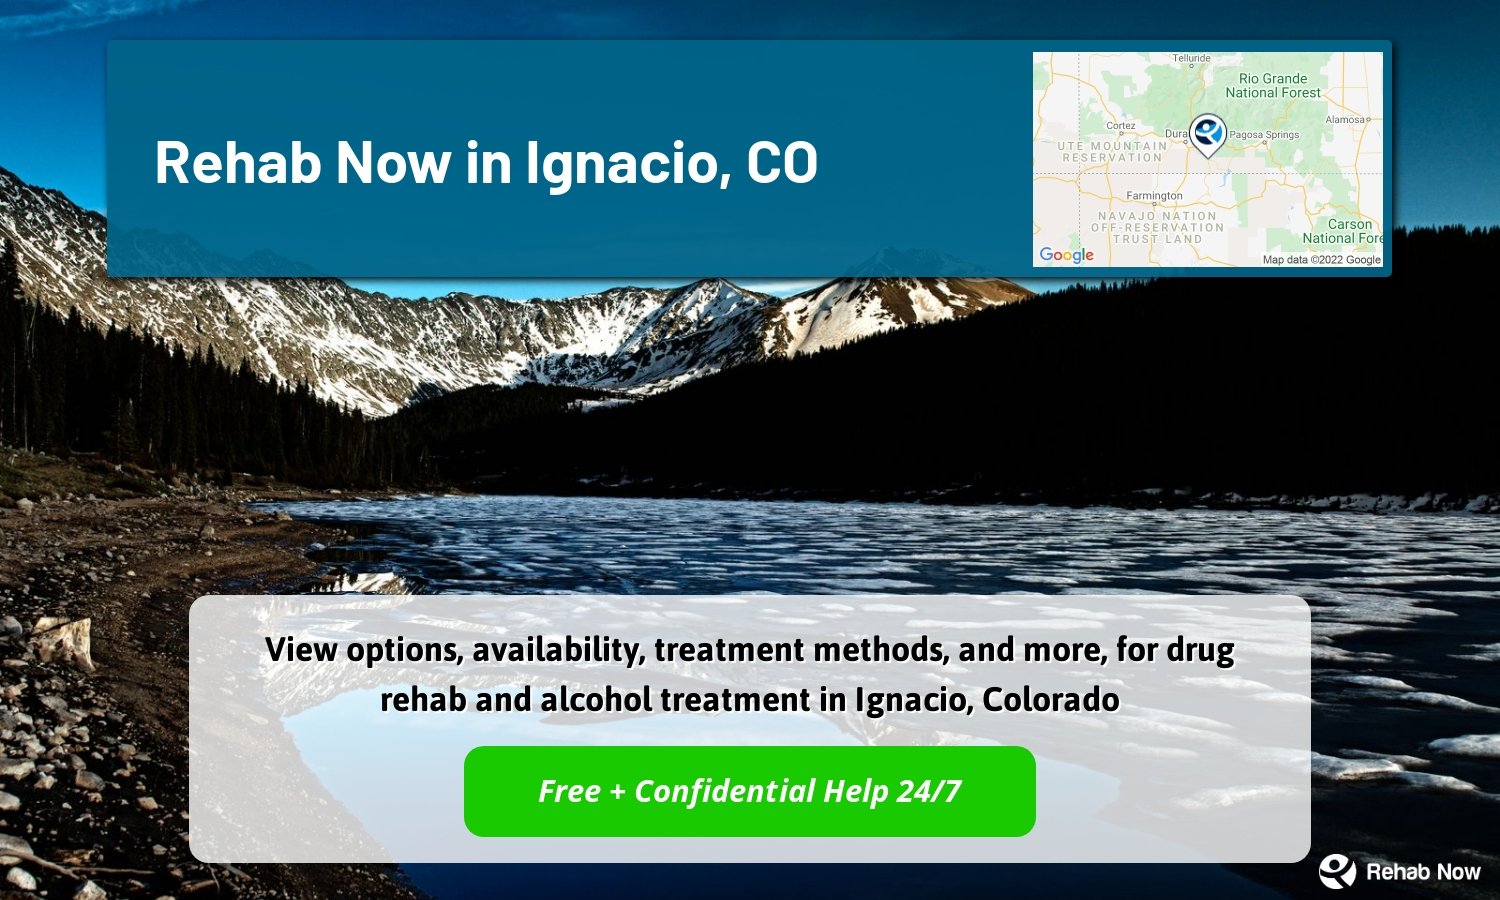 View options, availability, treatment methods, and more, for drug rehab and alcohol treatment in Ignacio, Colorado